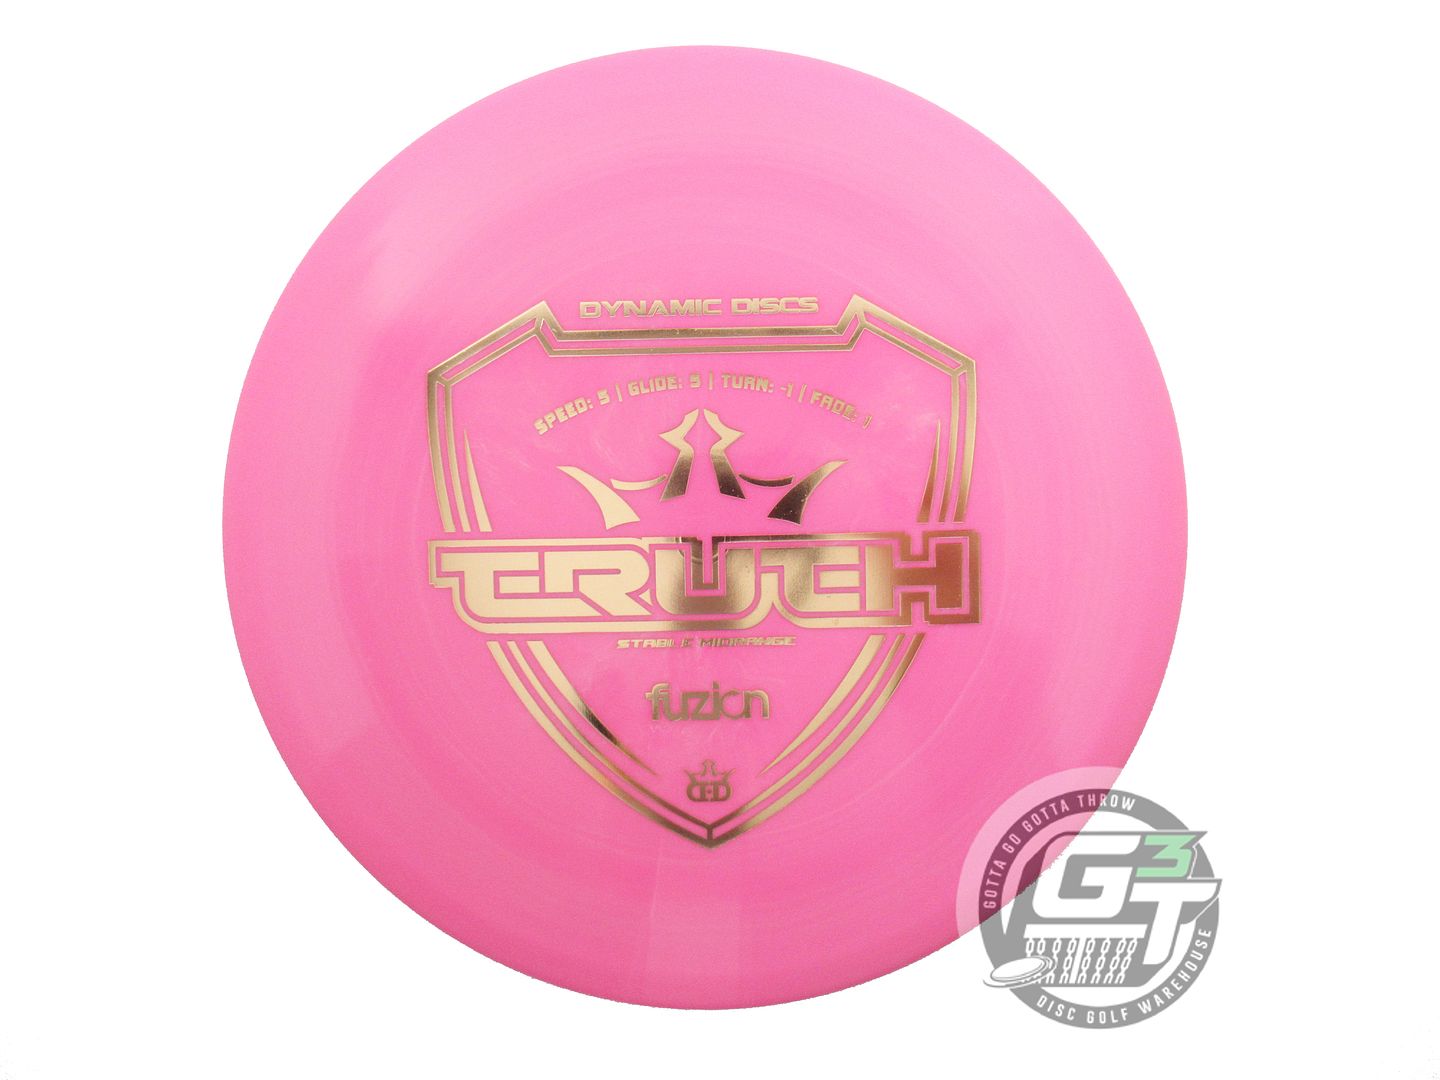 Dynamic Discs Fuzion Truth Midrange Golf Disc (Individually Listed)